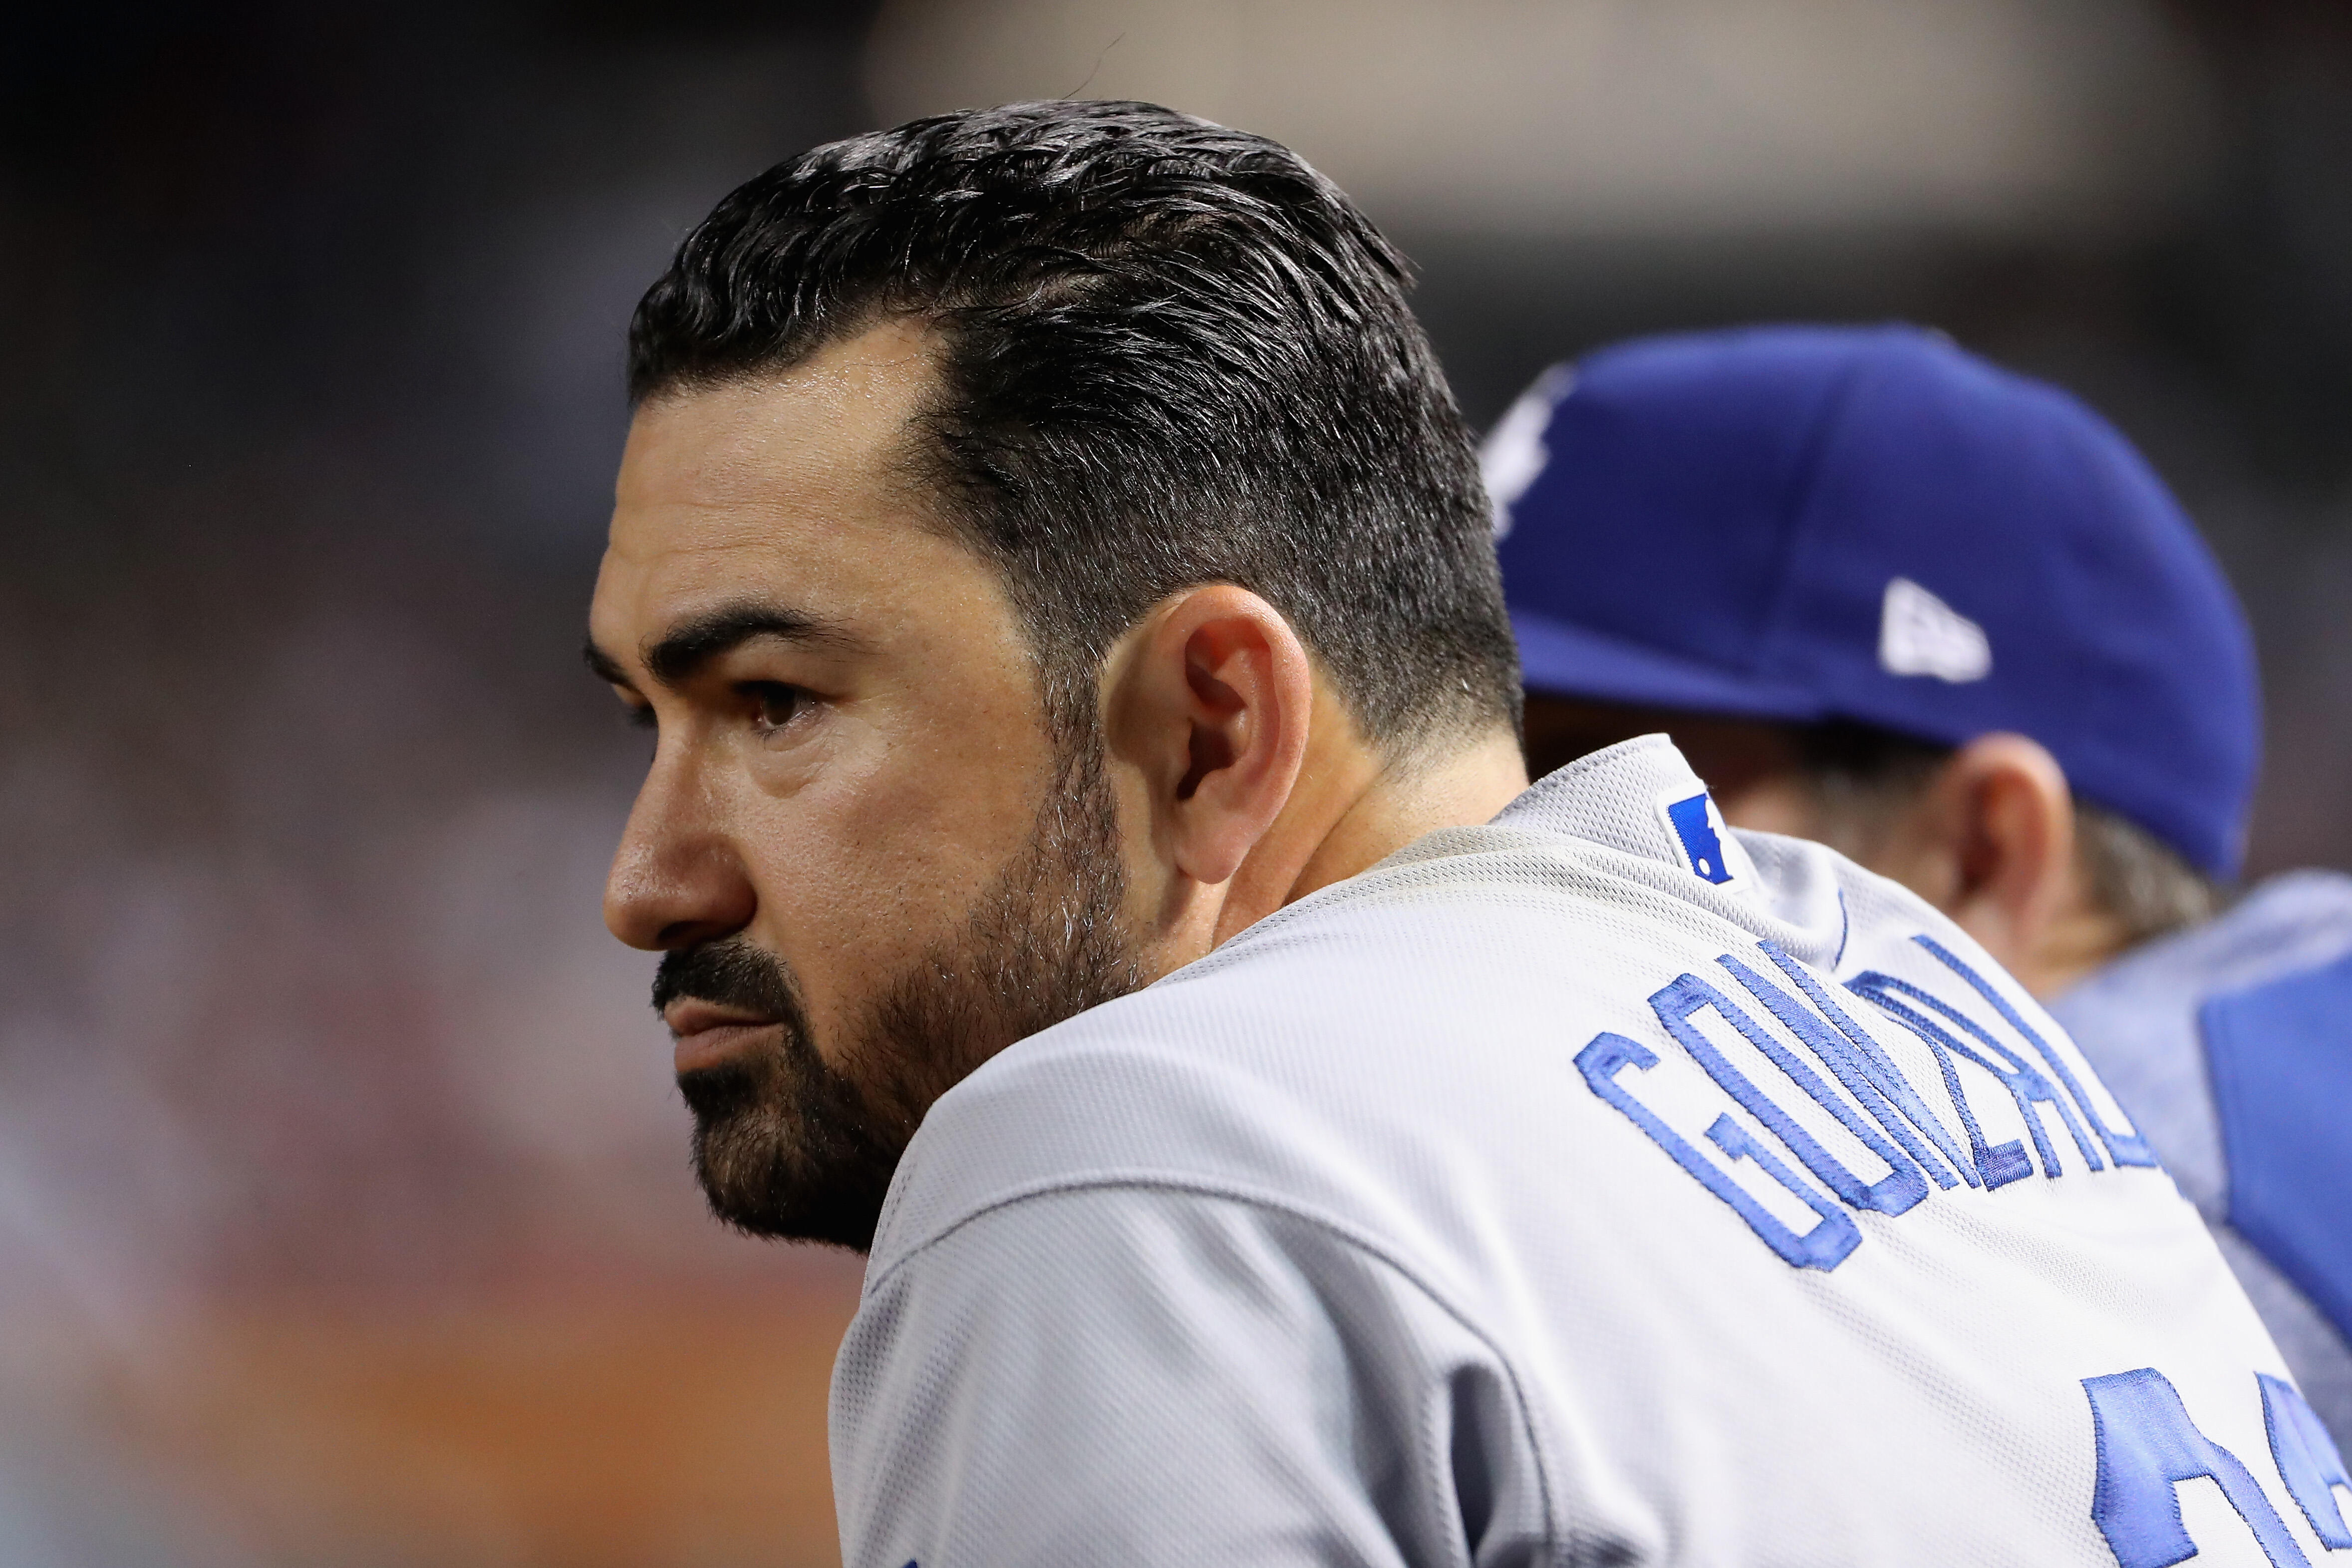 PHOENIX, AZ - APRIL 21:  Adrian Gonzalez #23 of the Los Angeles Dodgers watches from the dugout during the MLB game against the Arizona Diamondbacks at Chase Field on April 21, 2017 in Phoenix, Arizona.  (Photo by Christian Petersen/Getty Images)